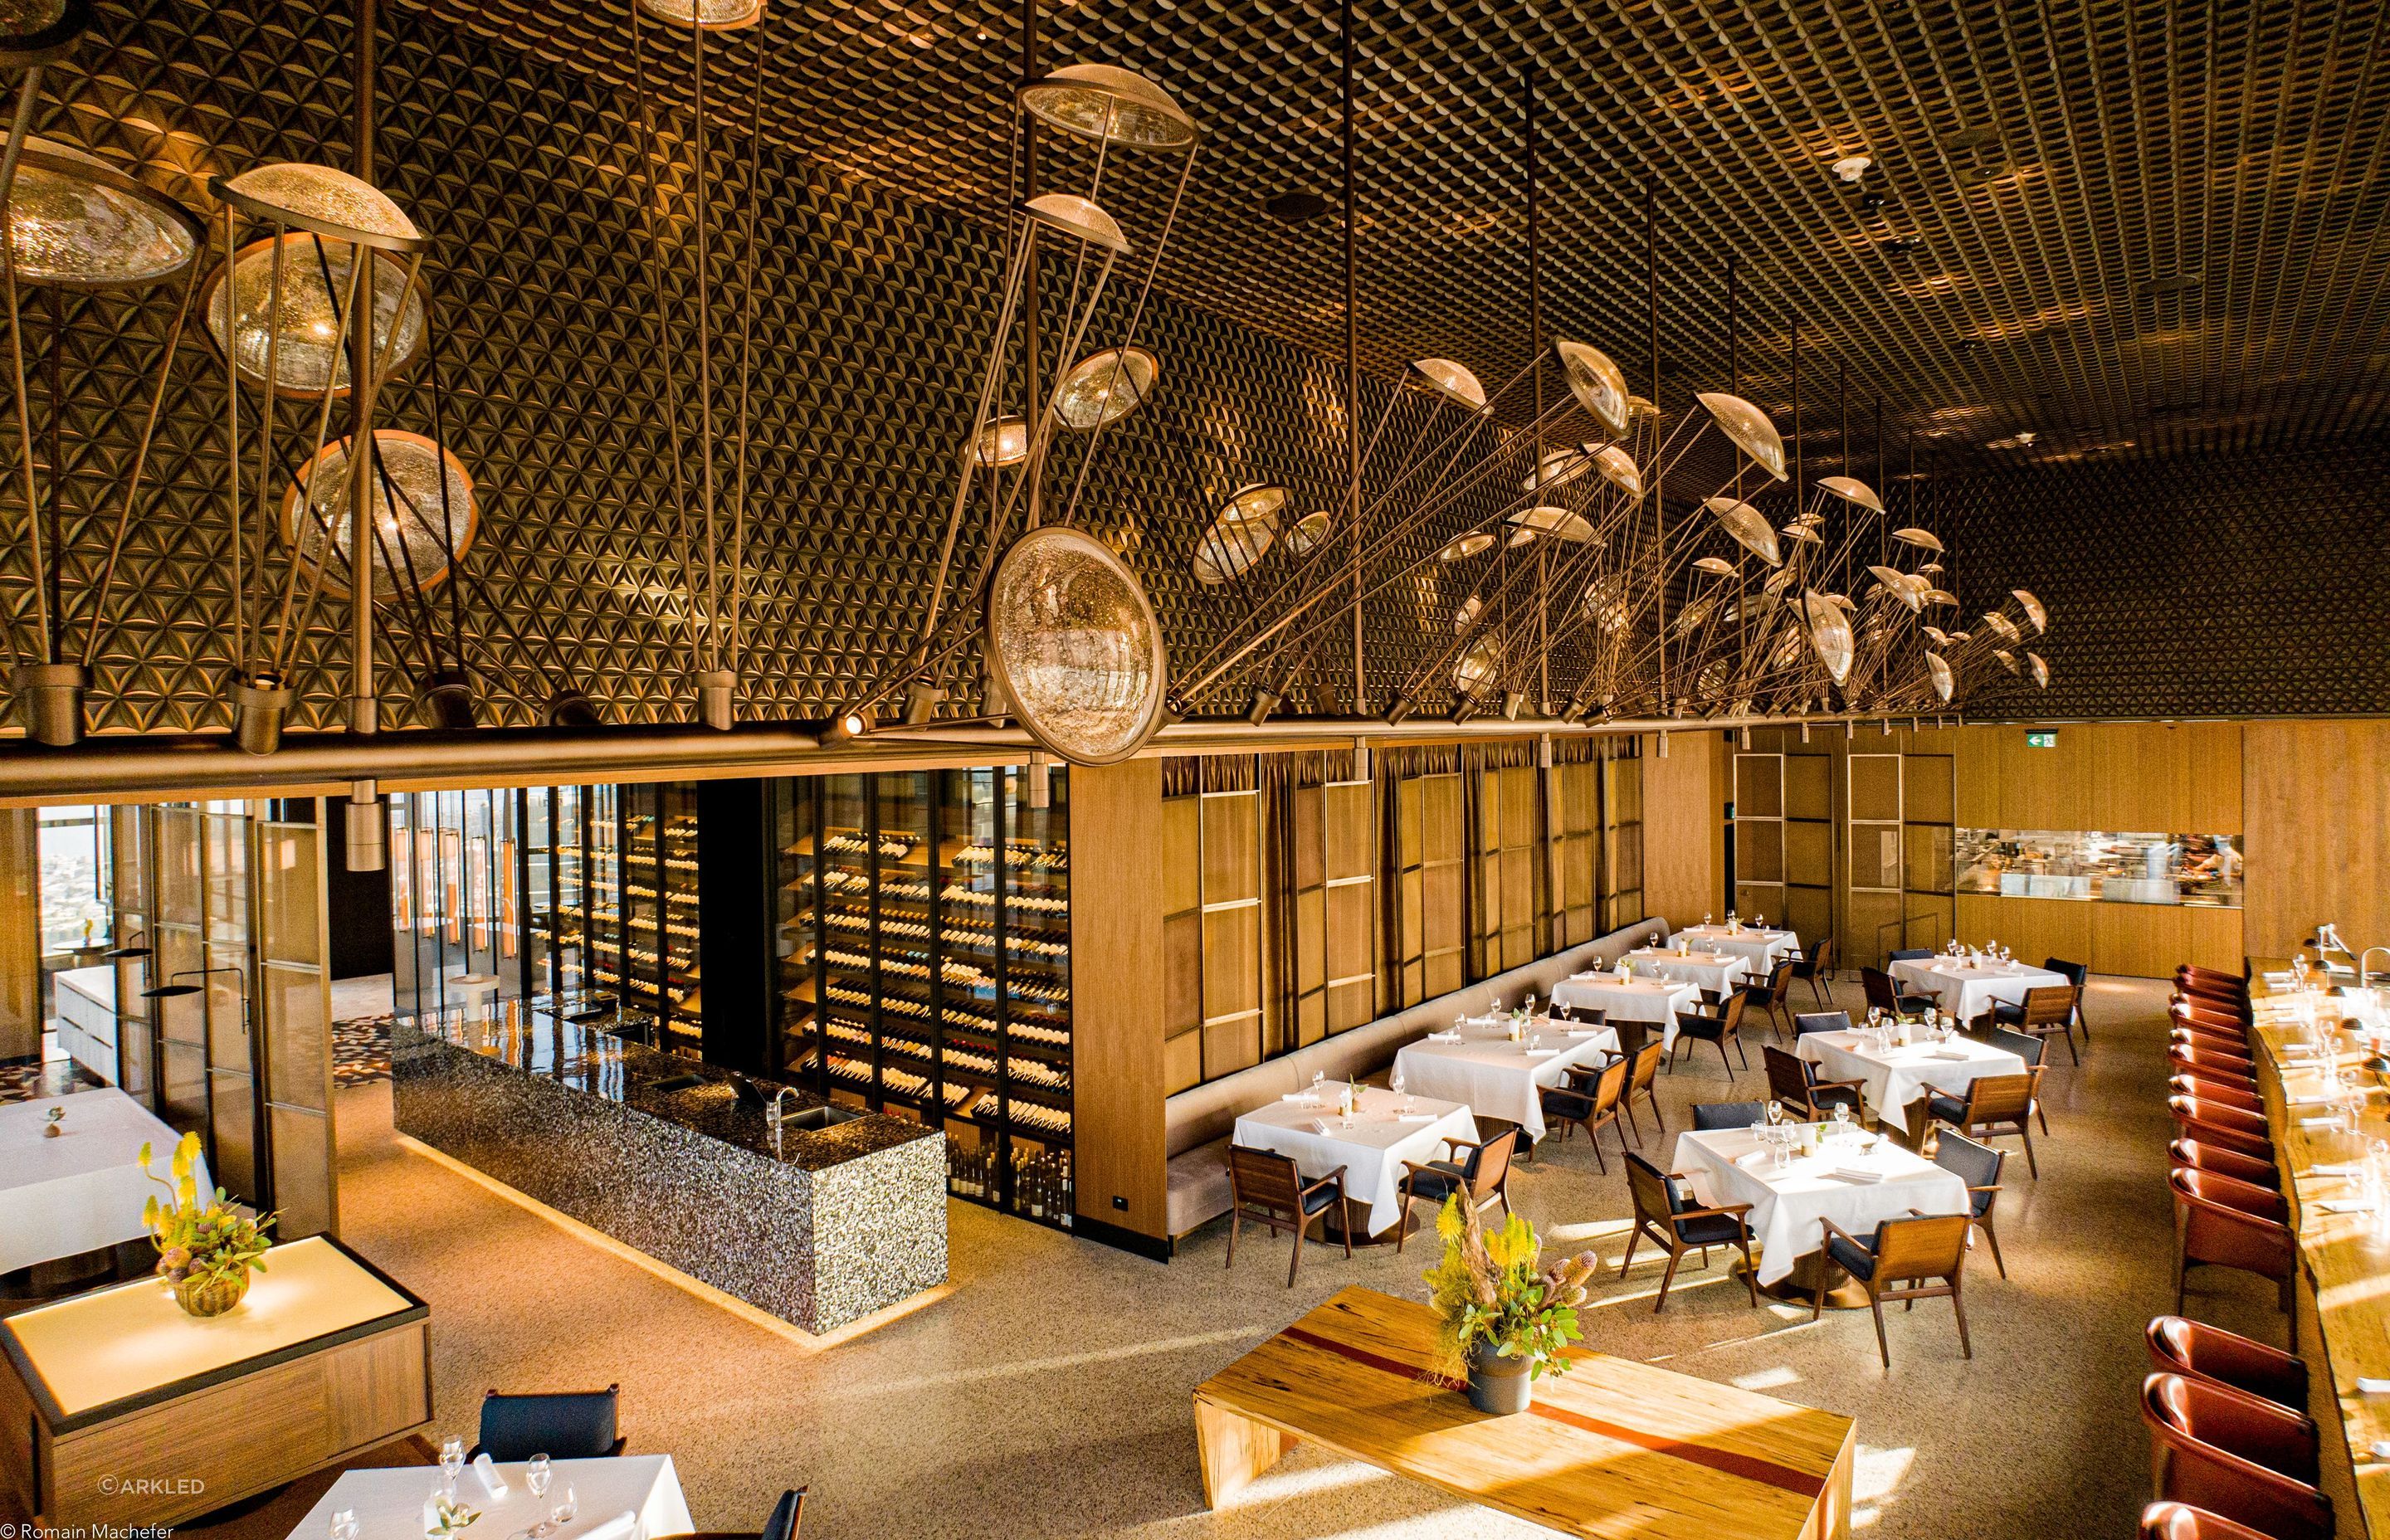 Atria Resturant; where the lighting takes on a sculptural form.